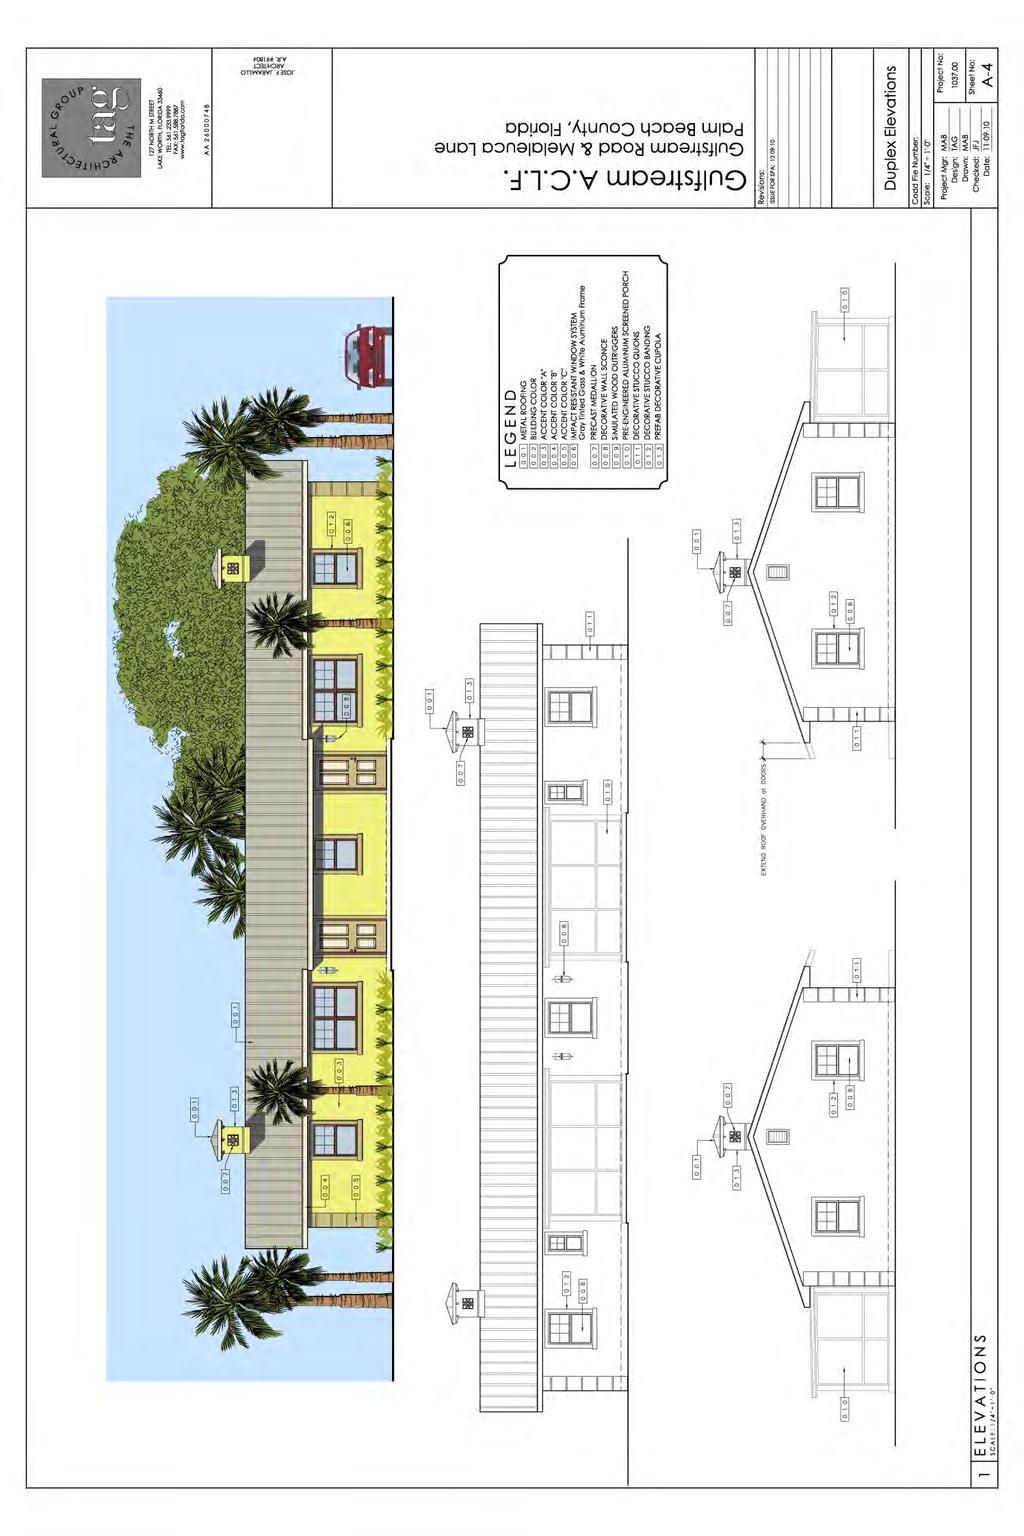 Figure 8 Typical Building Elevation submitted